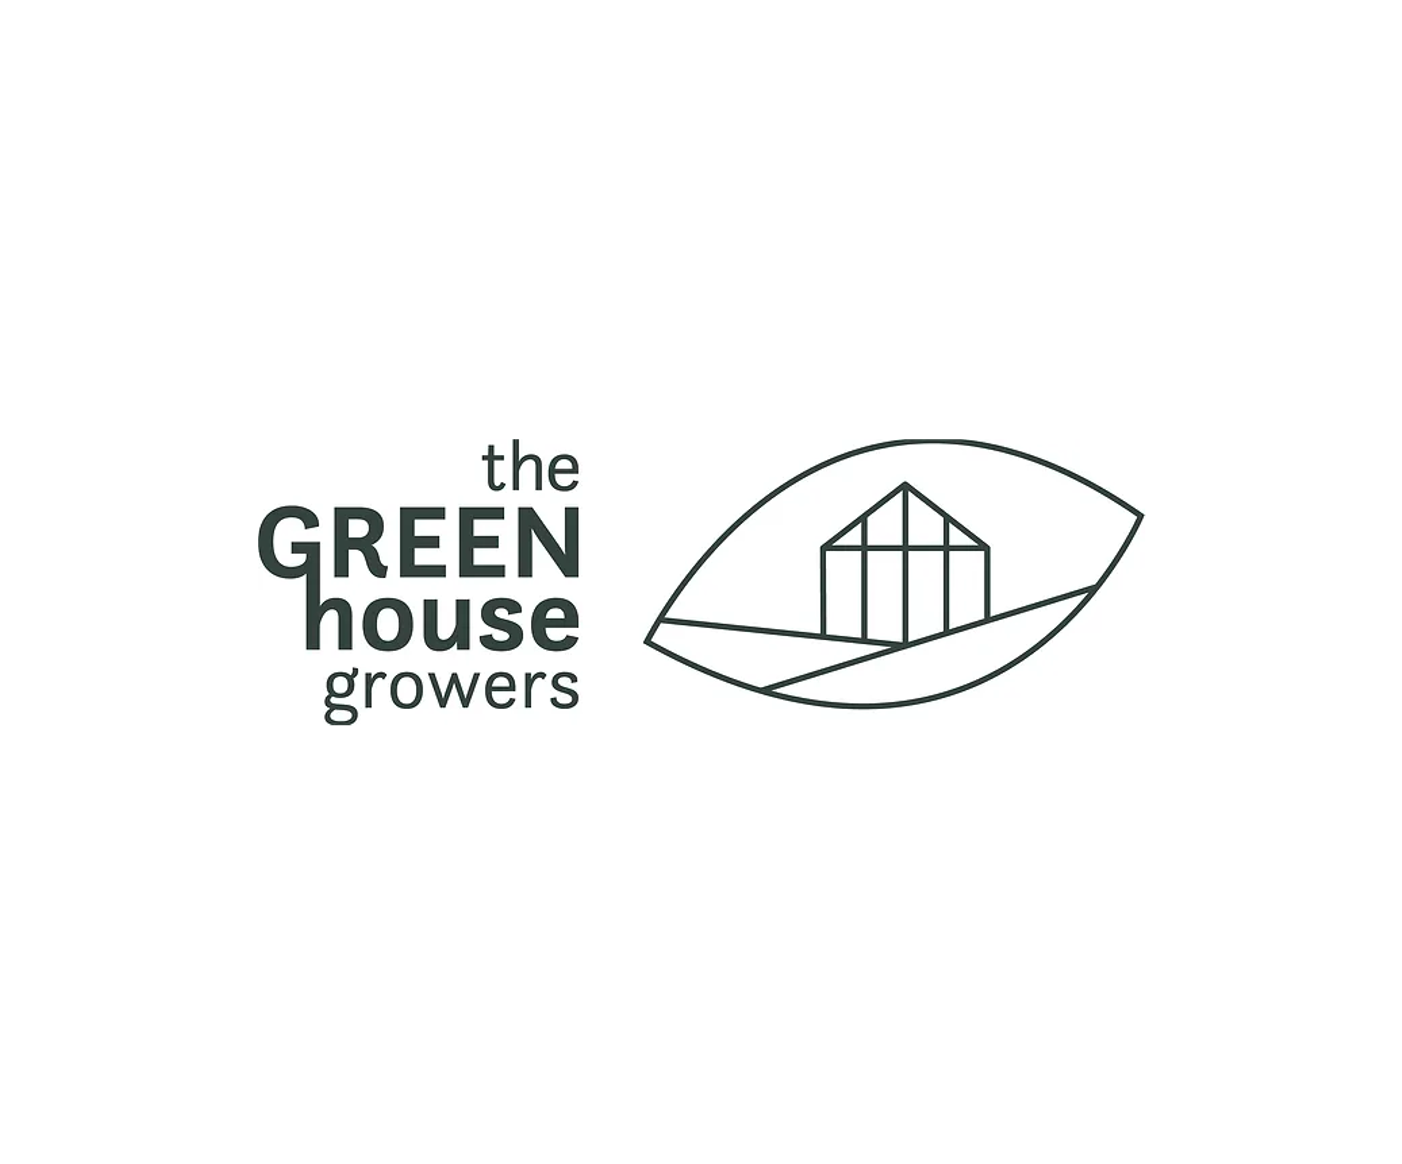 The Green House Growers logo